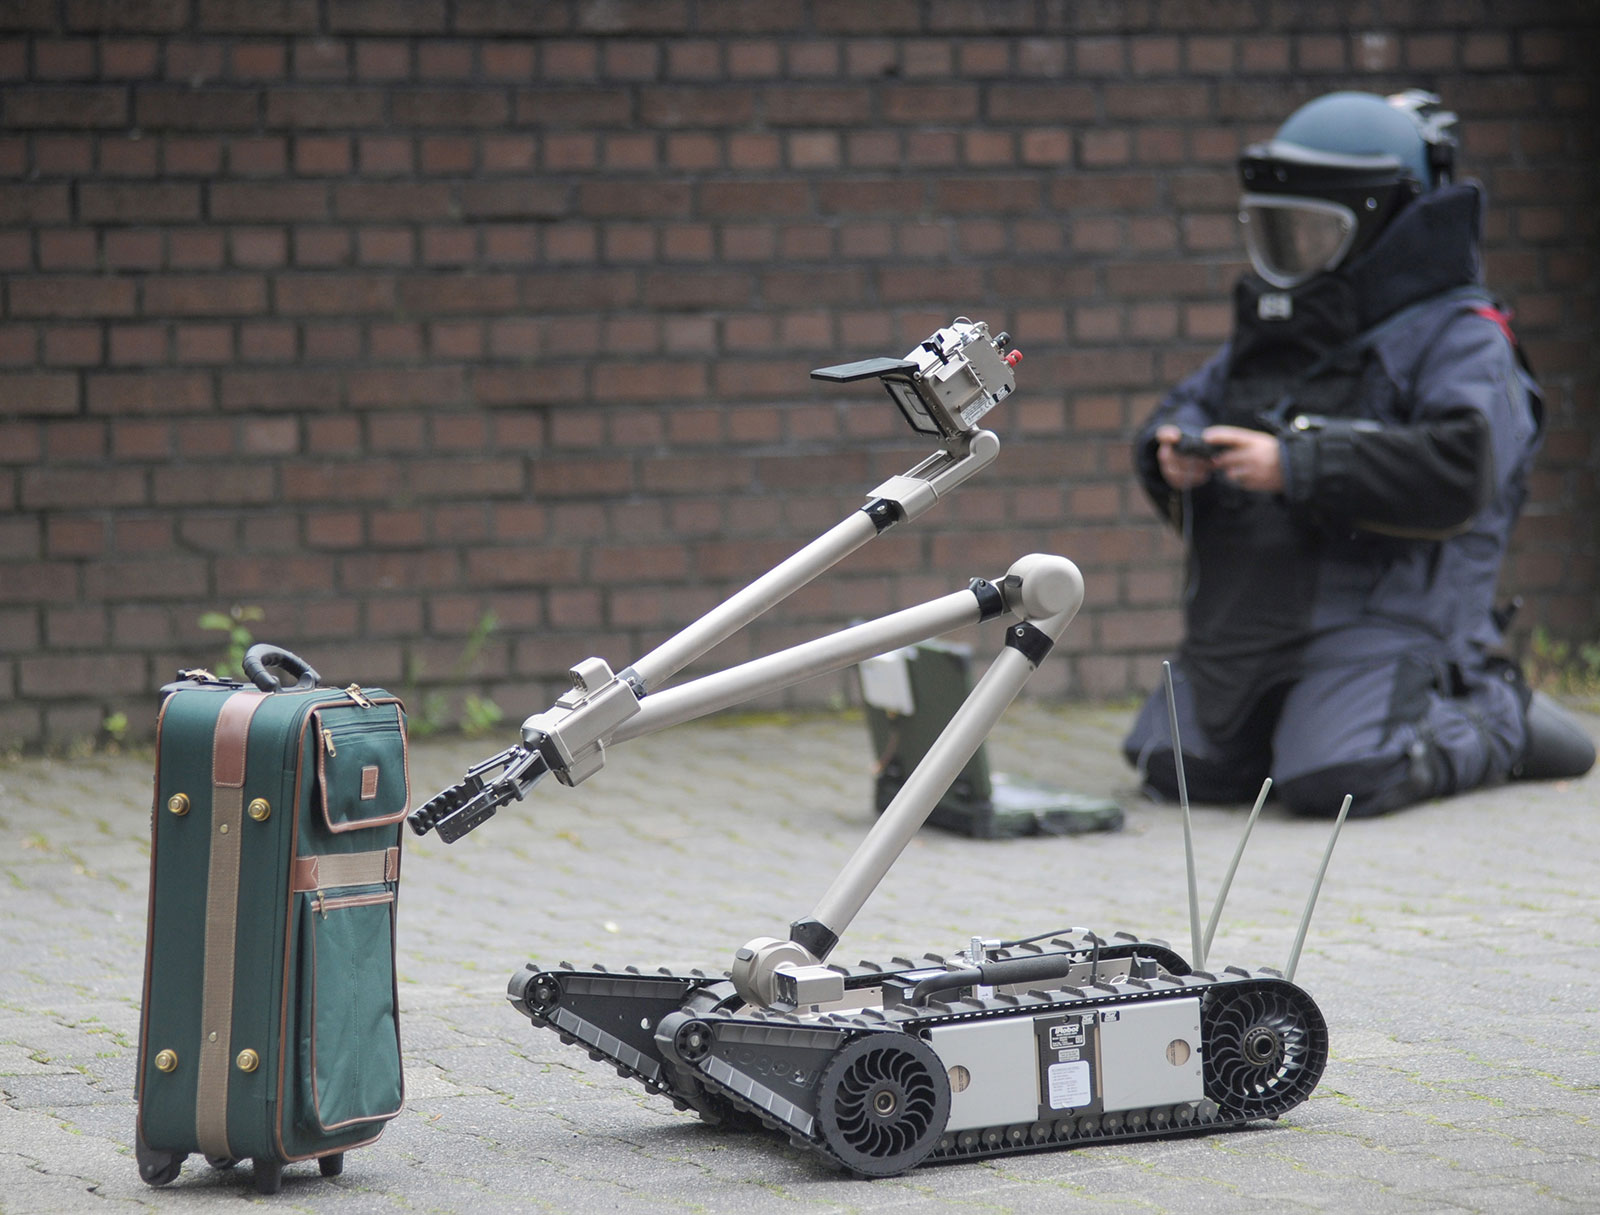 German Are Developing Bomb Squad Robot That Sees Inside Suitcases